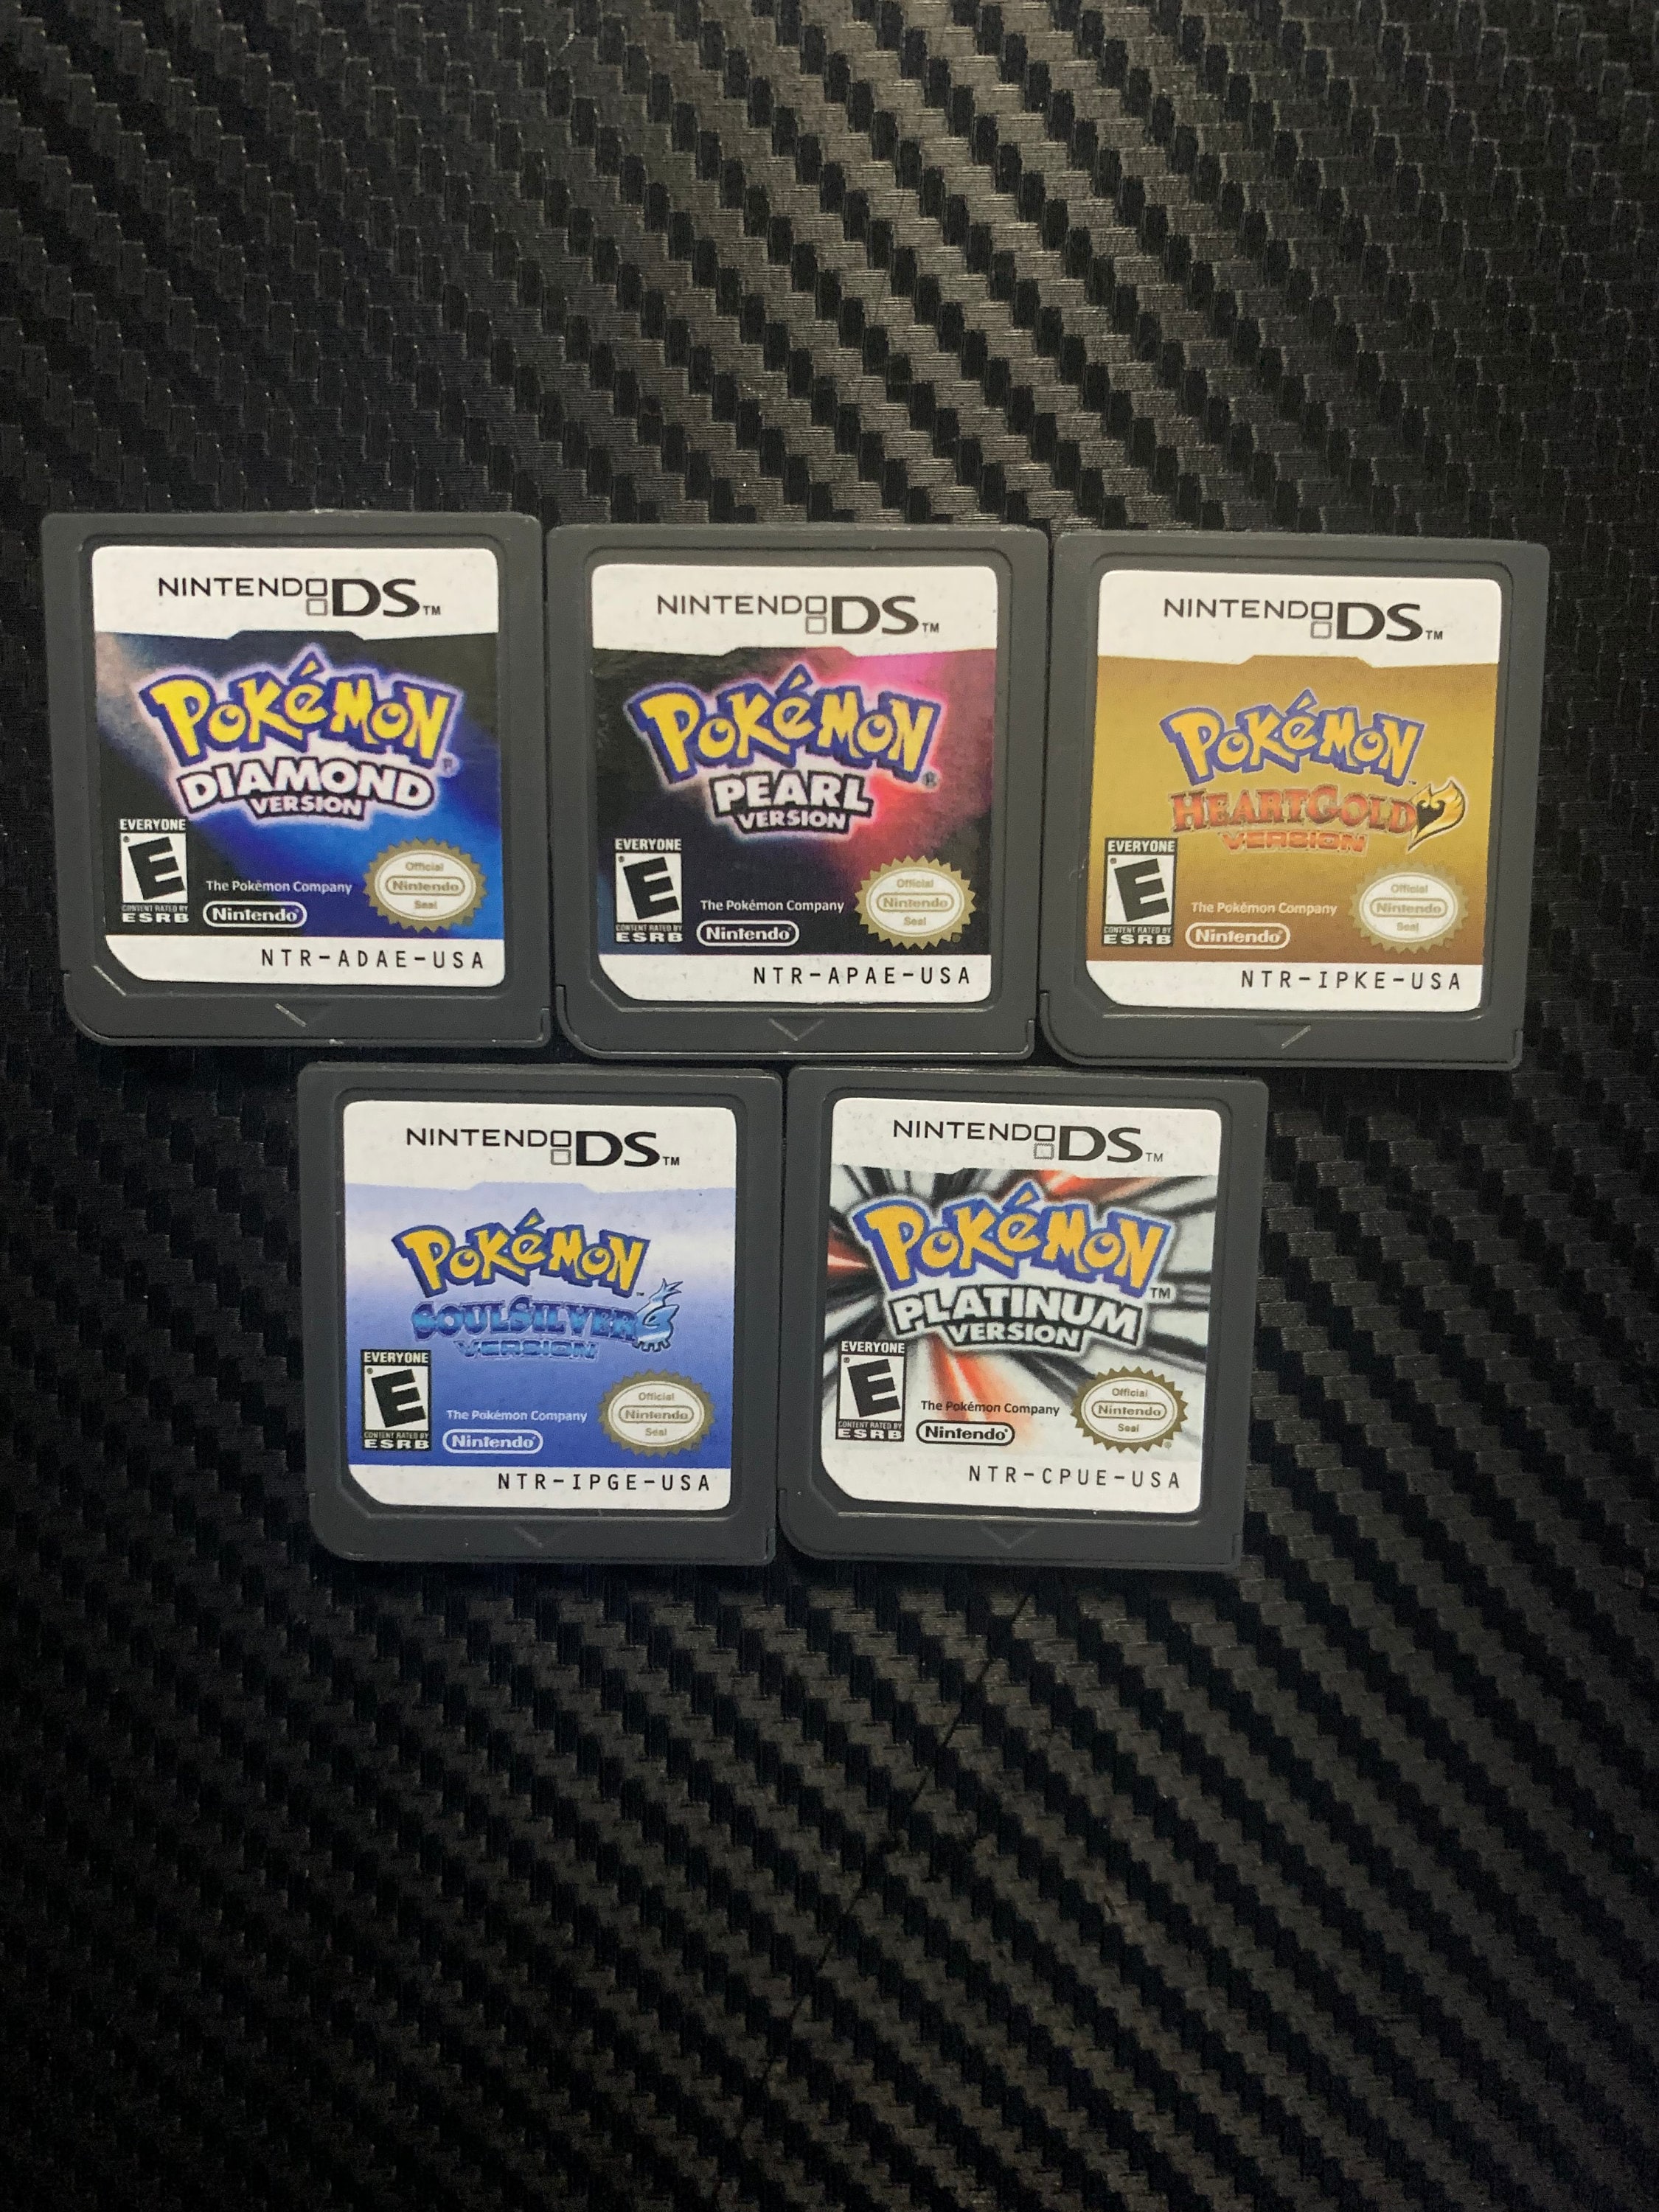 Pokemon HeartGold & SoulSilver for DS - Real or Fake? : r